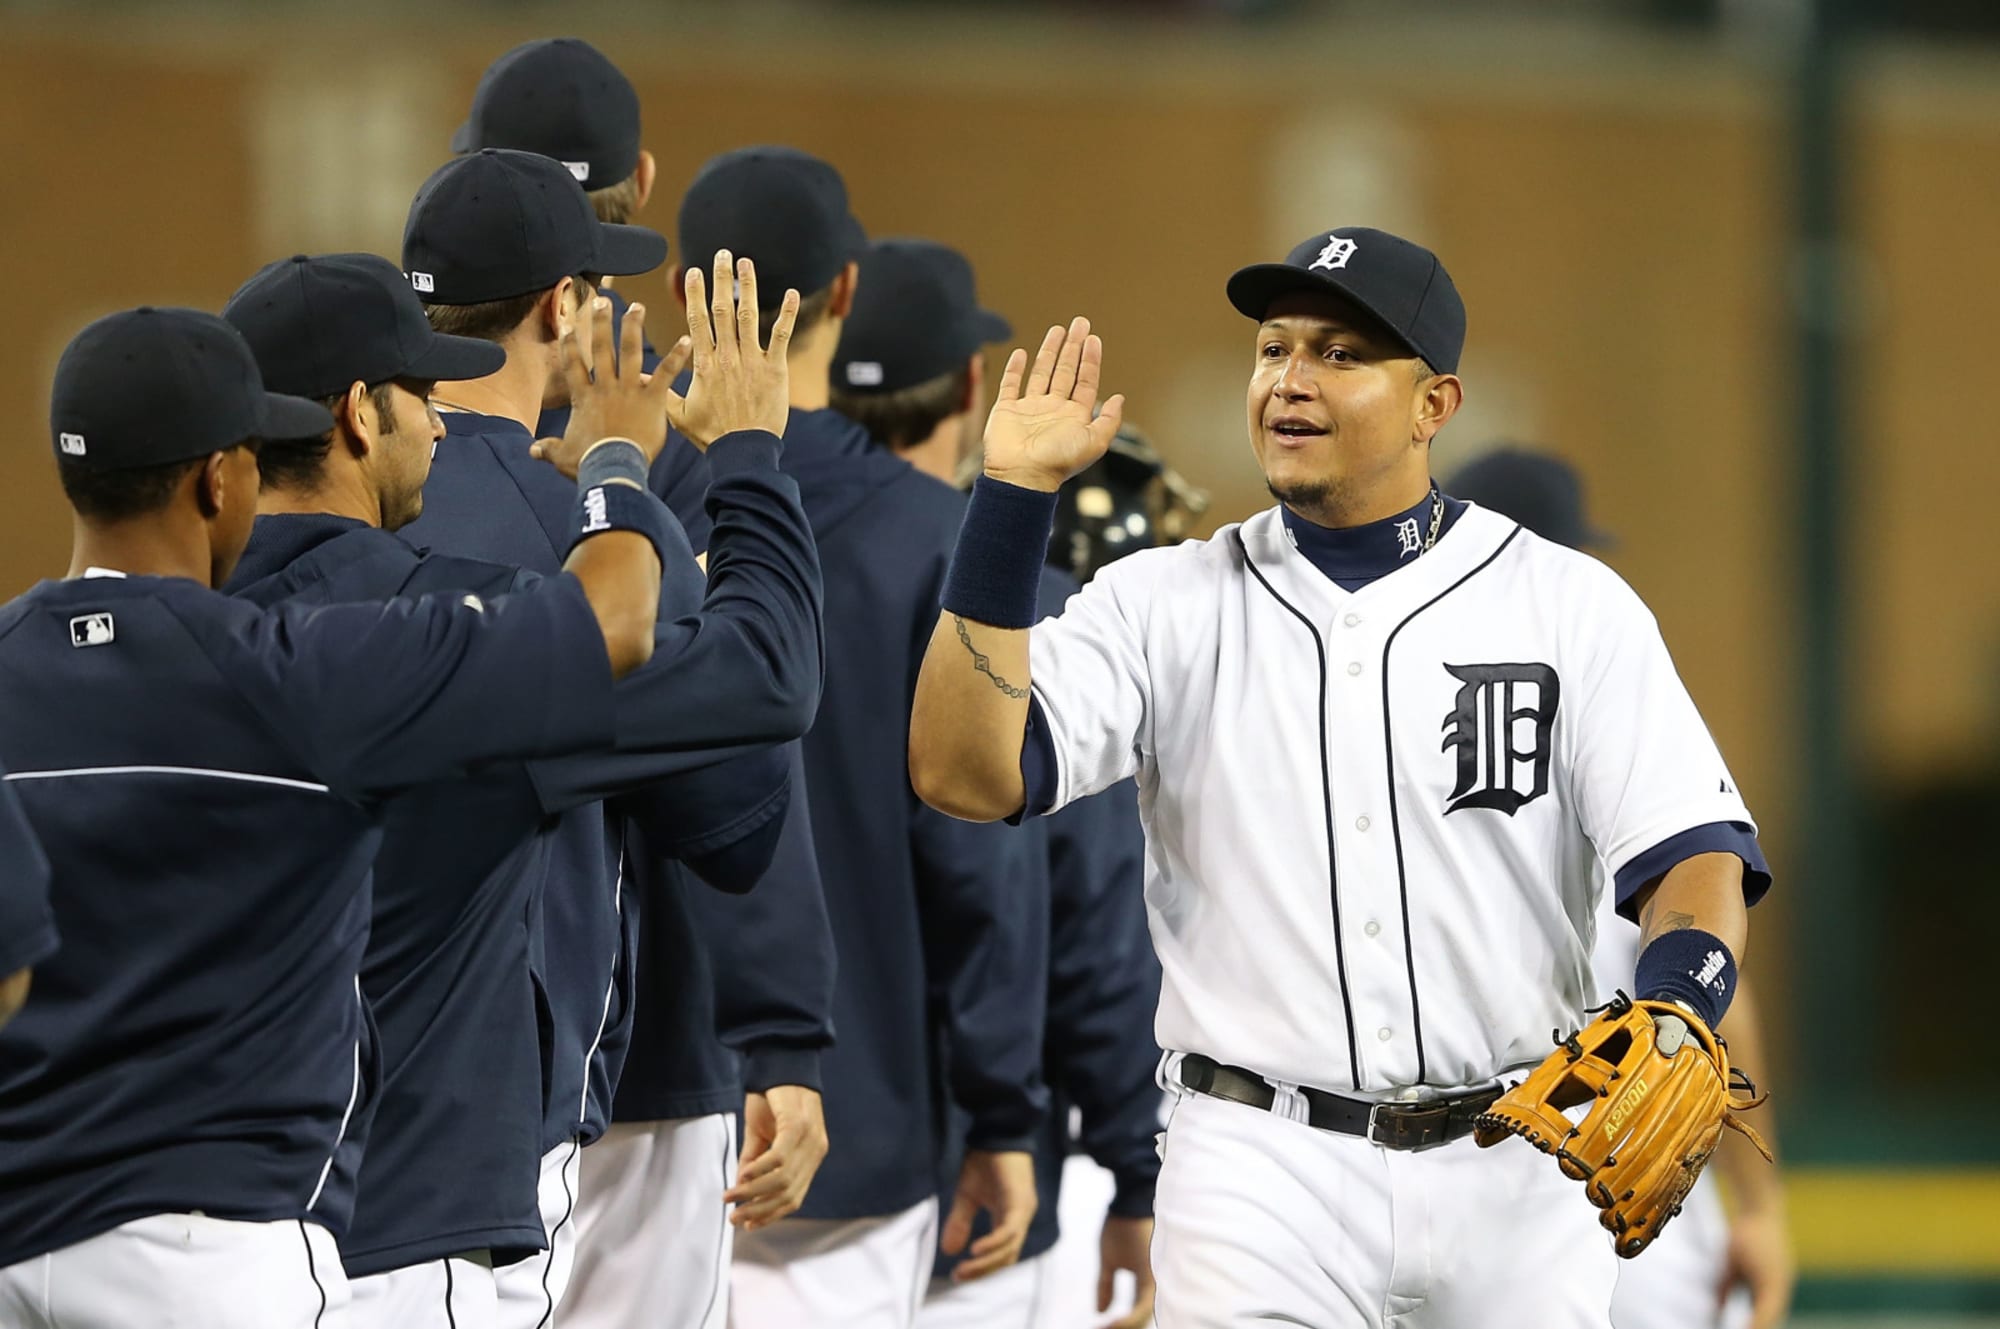 Detroit Tigers The 25man roster challenge may break you